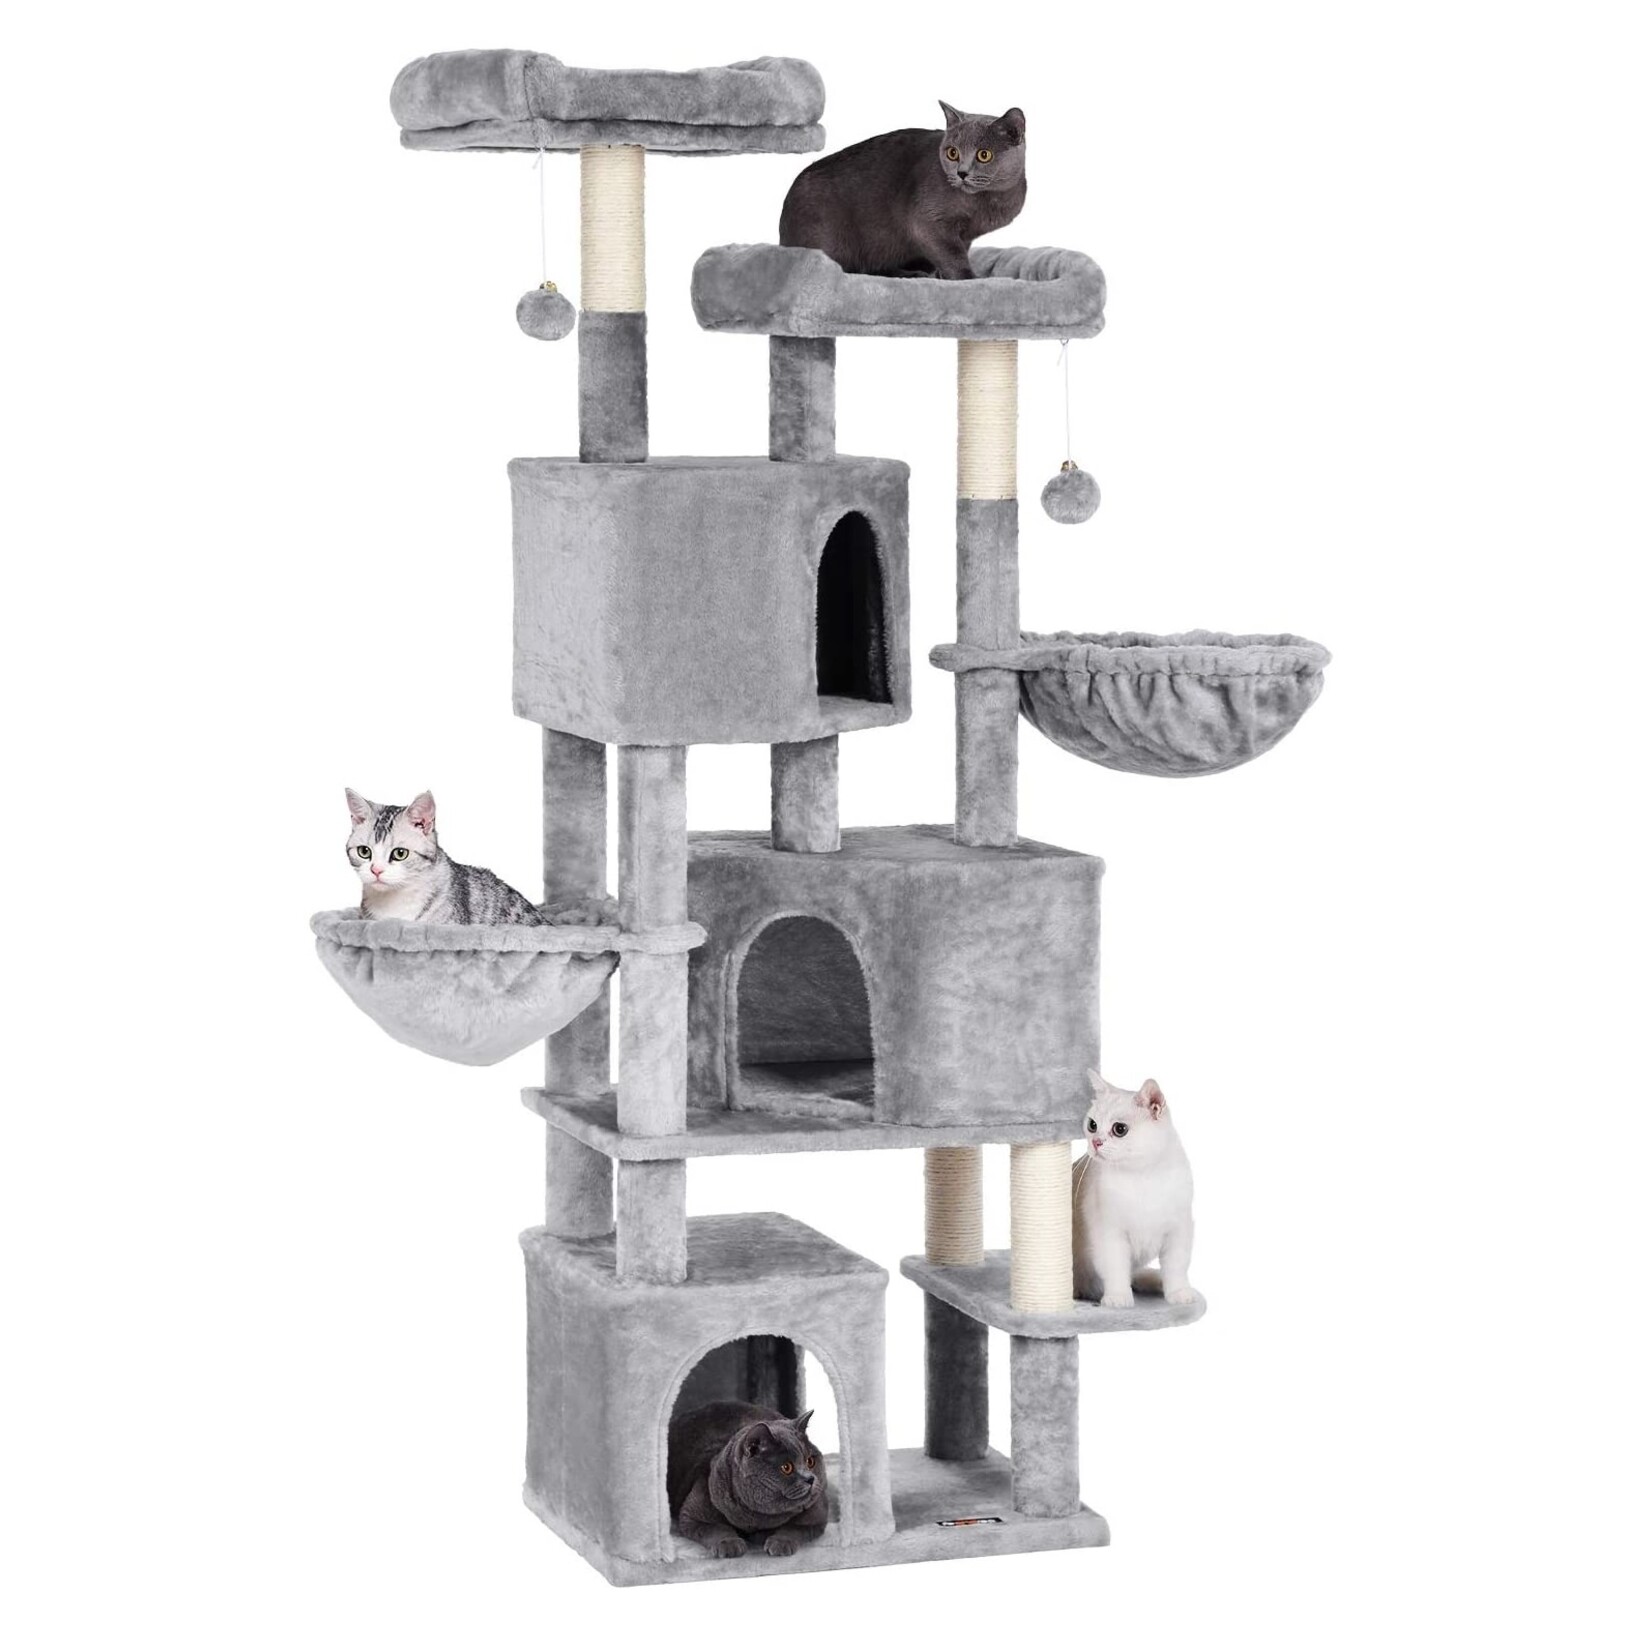 Bobbel Home Bobbel Pets - Stable Scratching Post - Incl. 3 Caves - 2 Baskets - 2 Viewing Platforms - Plush - Gray